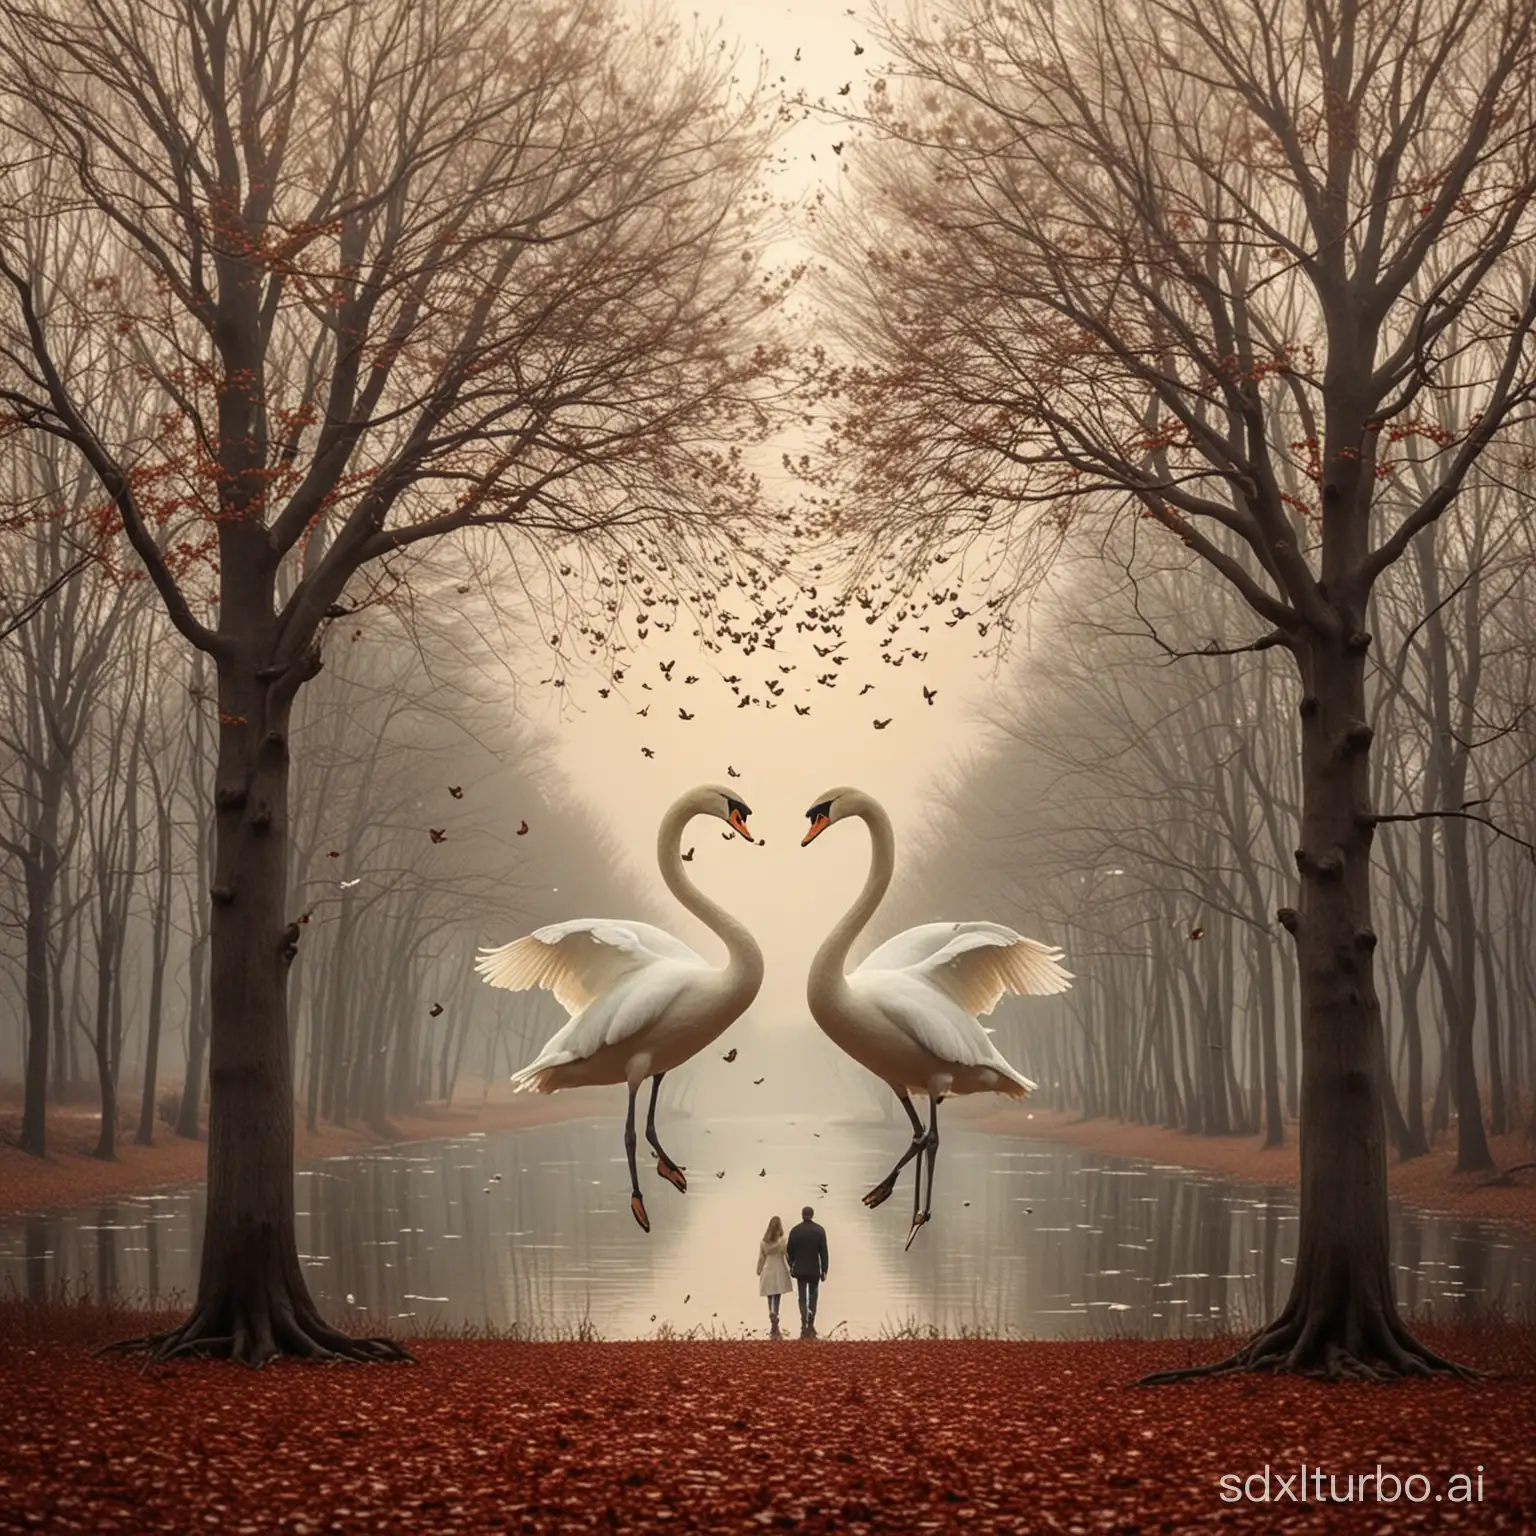 Connected-Hearts-Two-People-Amidst-Flying-Swans-and-Trees